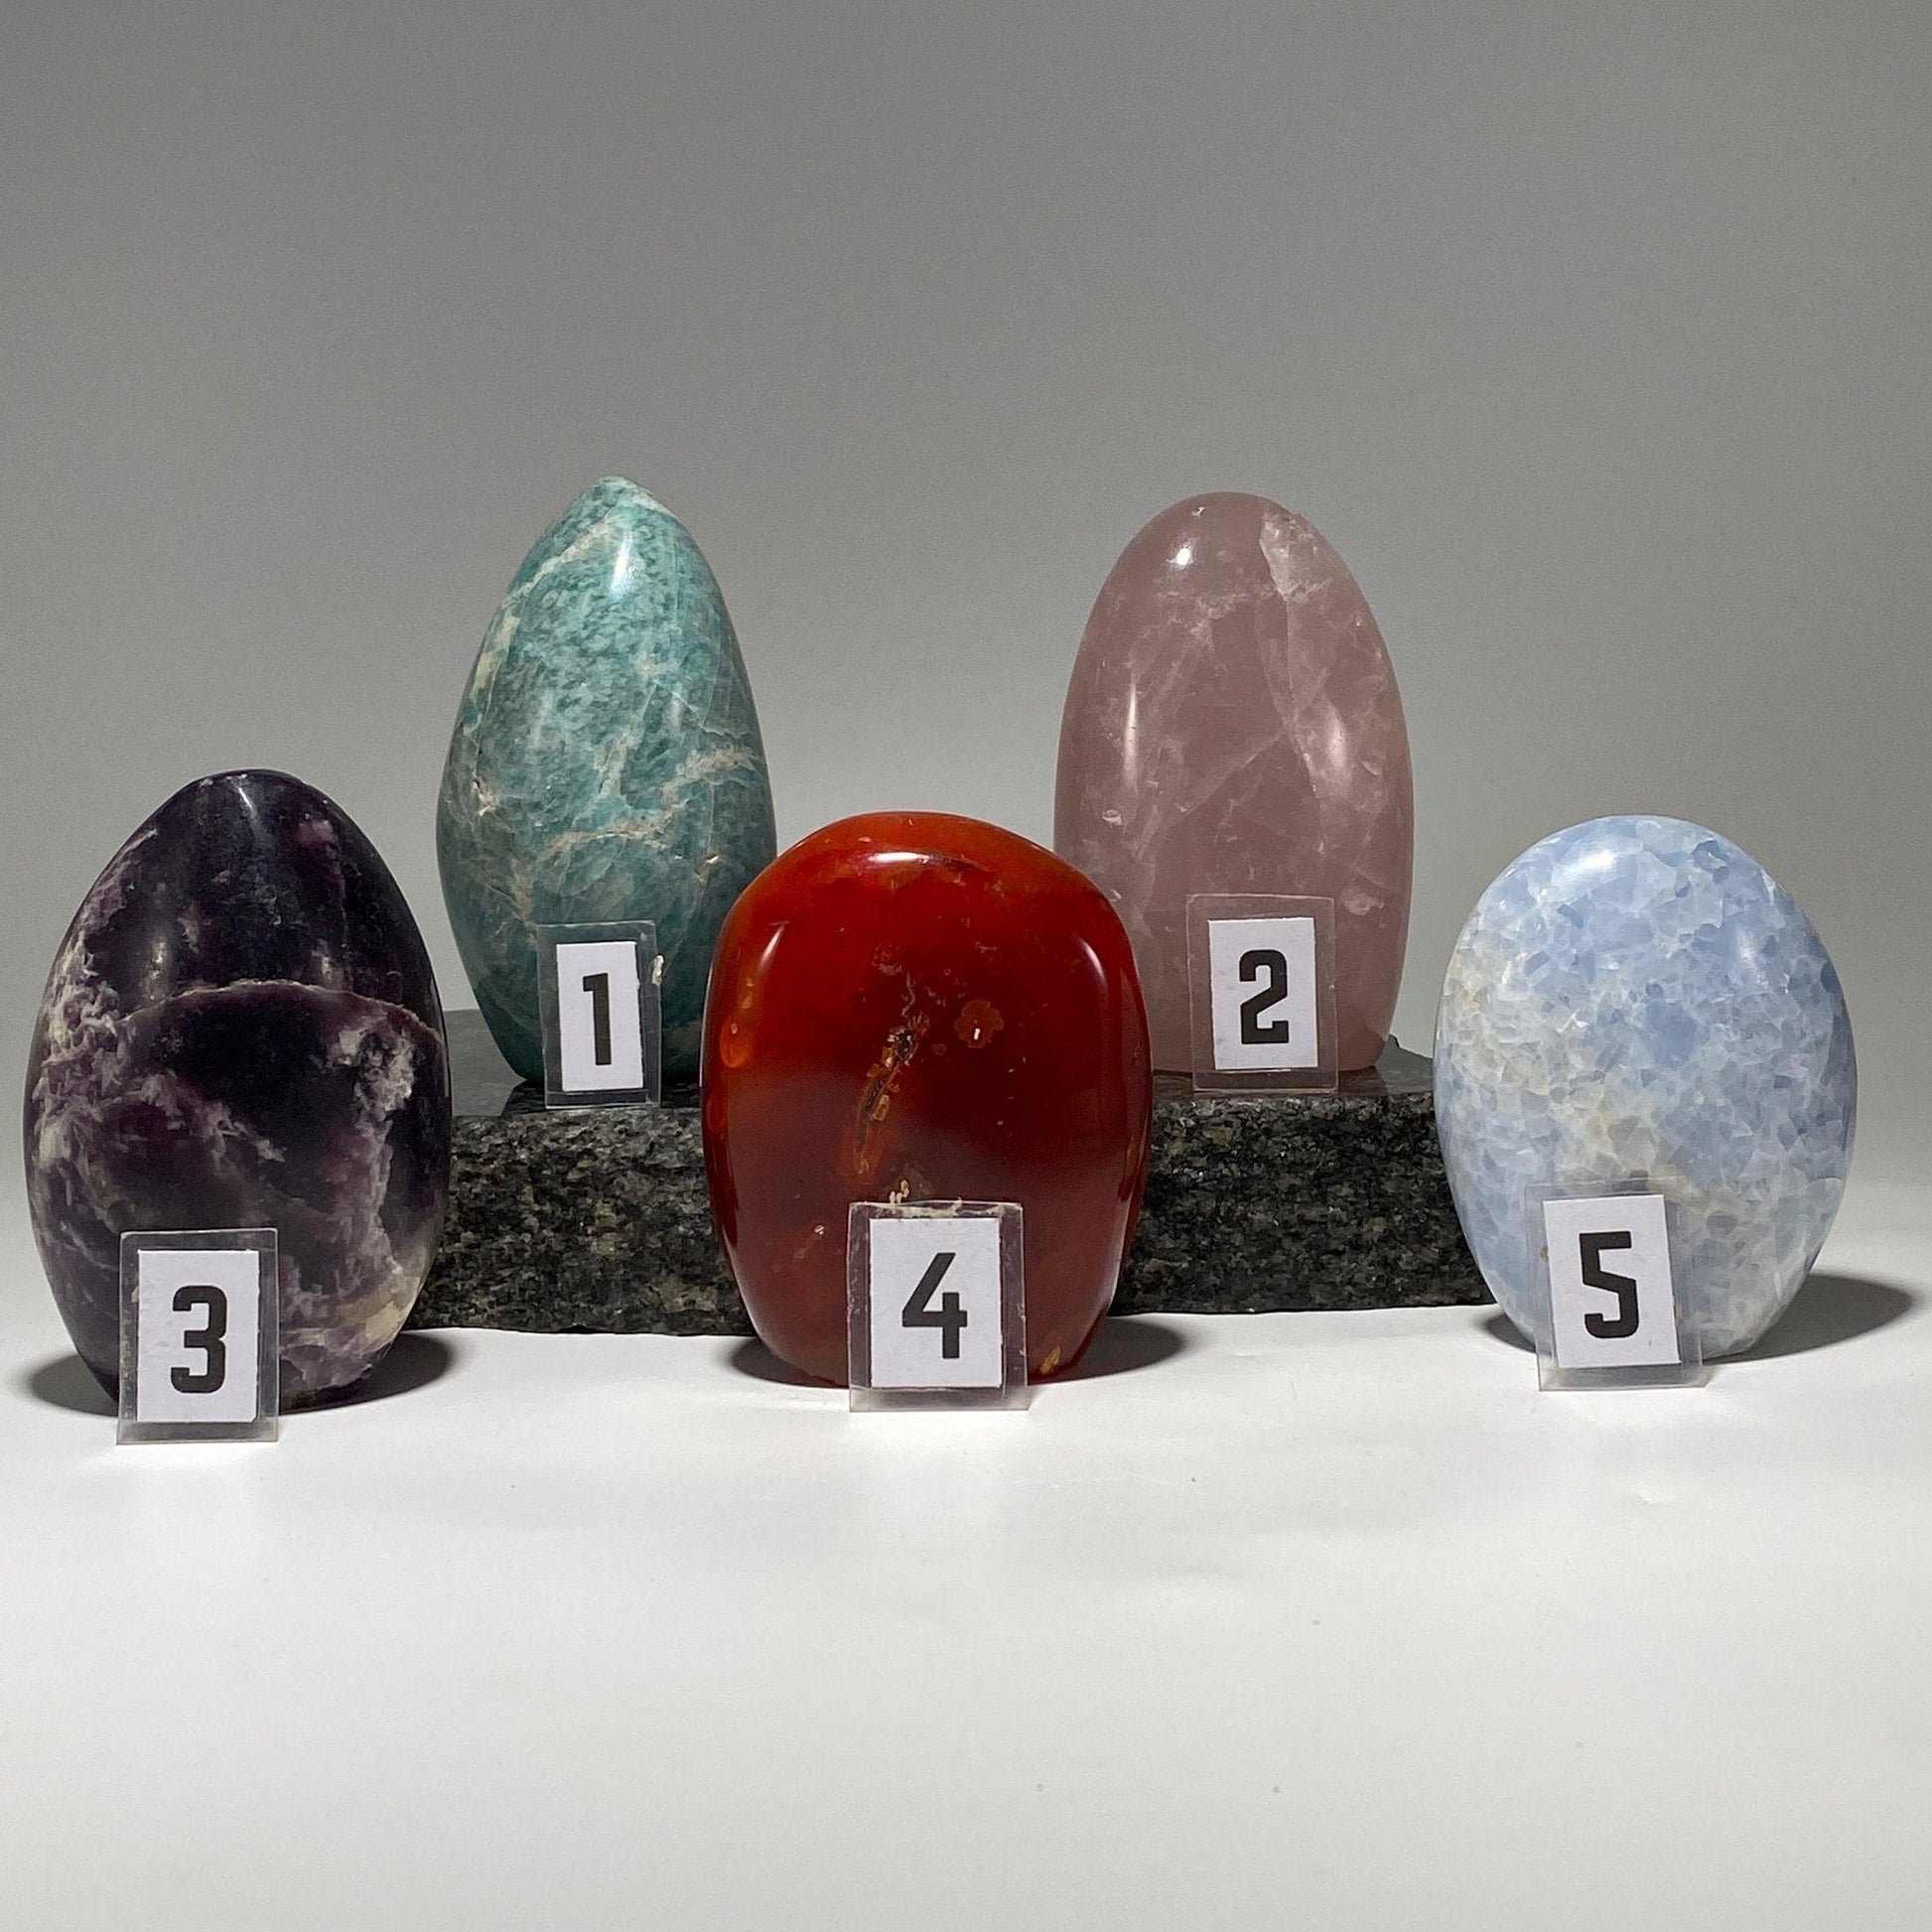 Free standing polished crystals